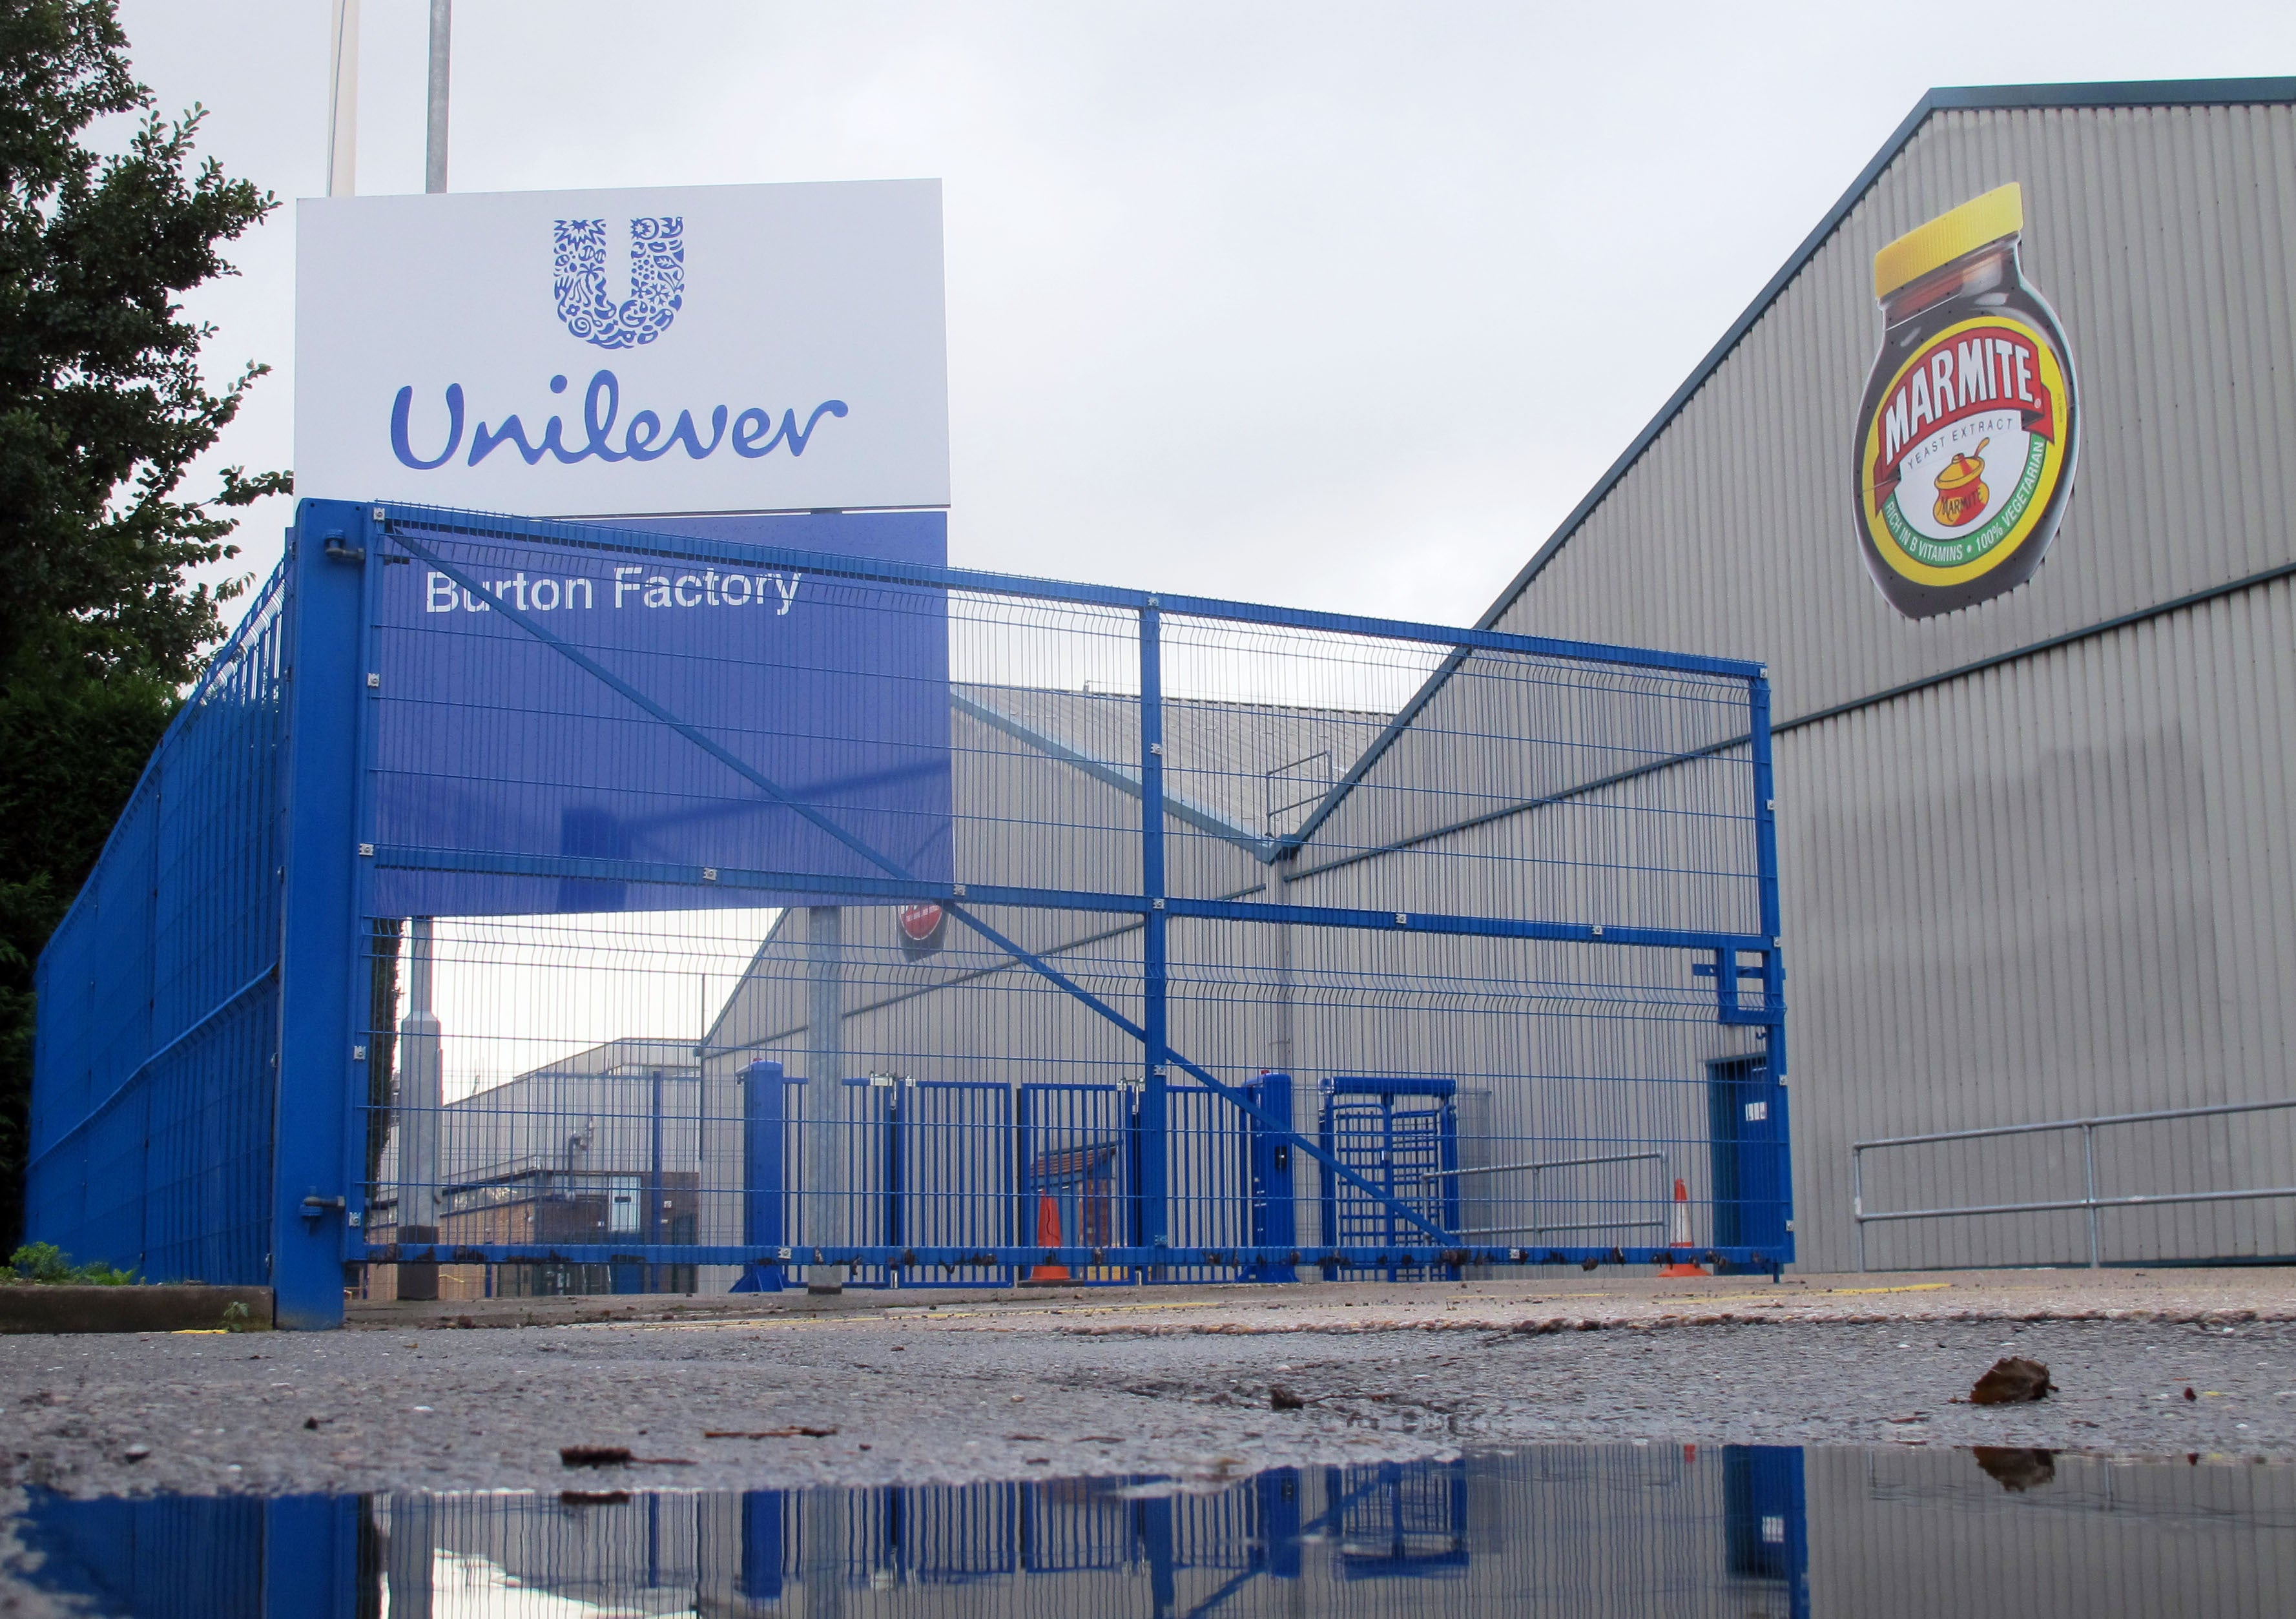 Unilever makes Marmite, Ben & Jerry’s, and many other products (Matthew Cooper/PA)